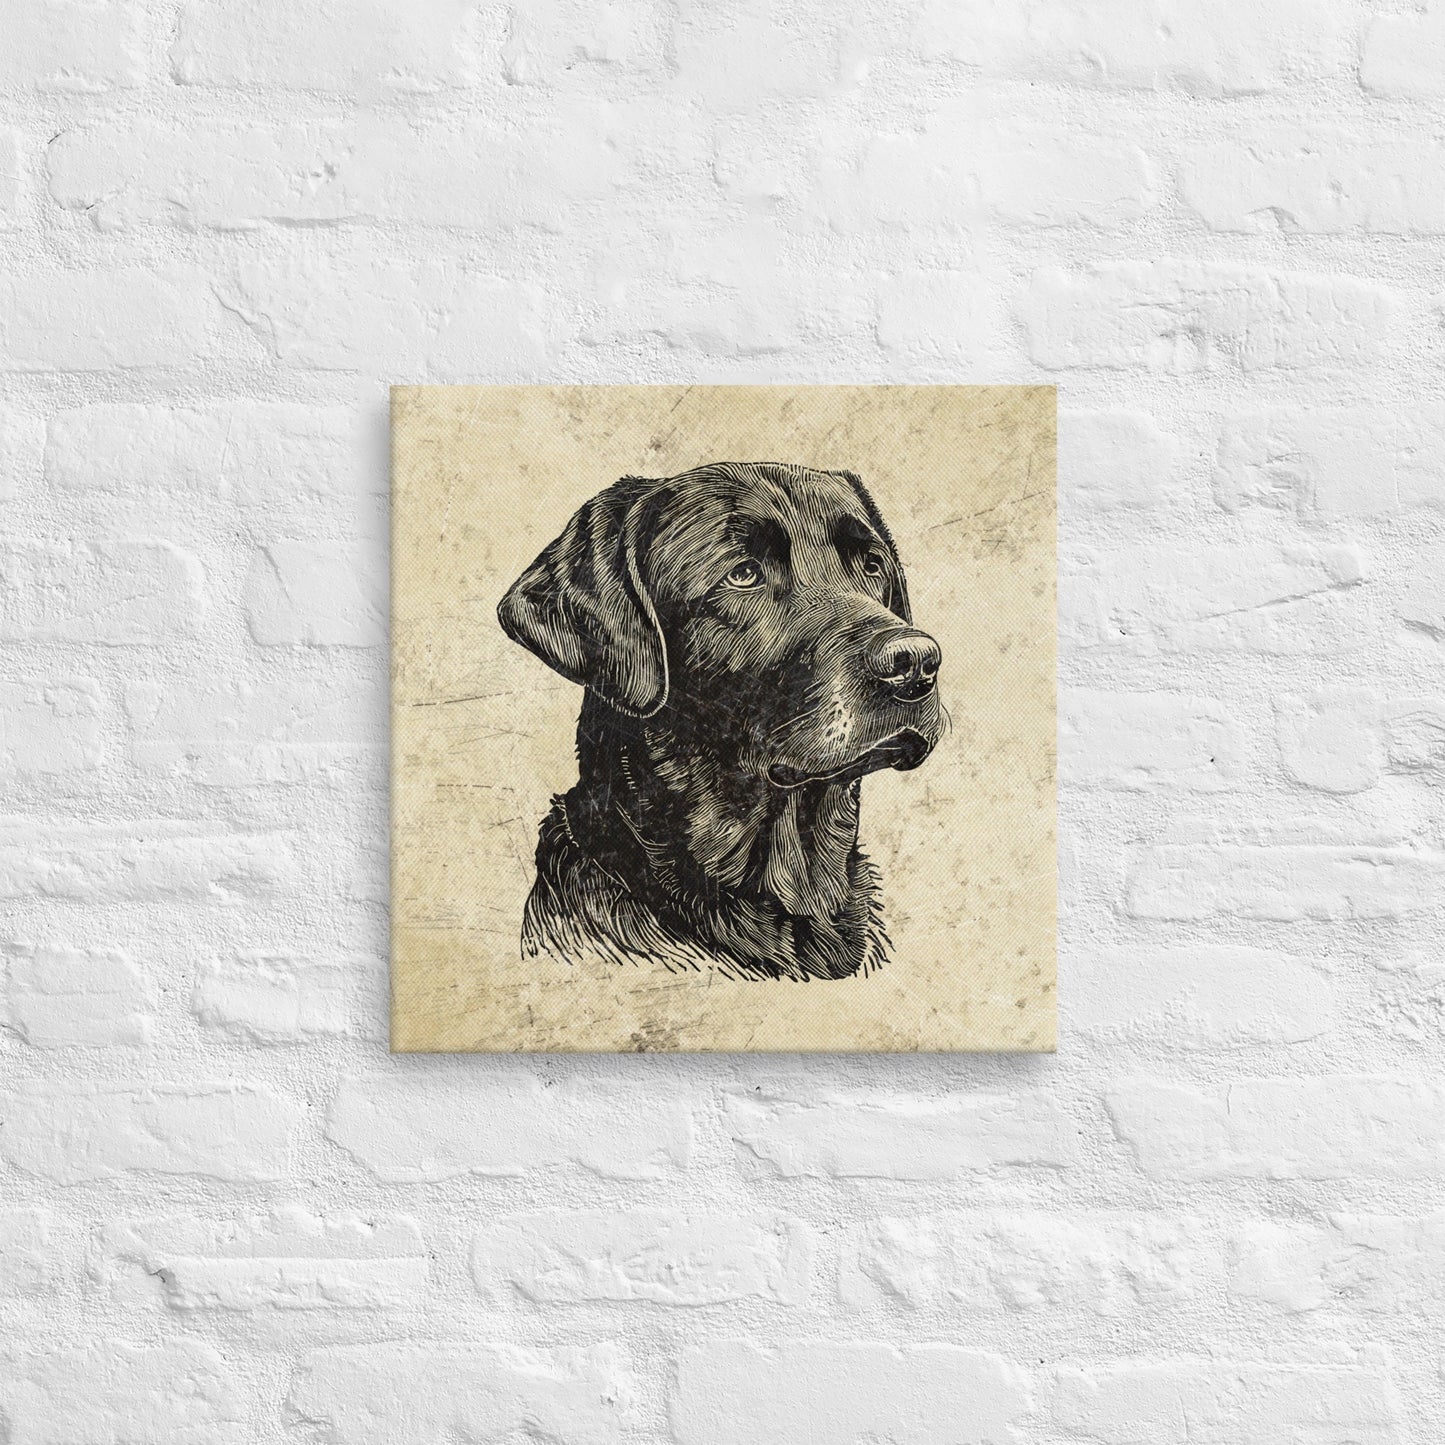 Vintage Retro Black Lab Hunting Dog Engraved Distressed Stretched Wall Art Decor Canvas Hunter Gift for Hunting Lodge or Cabin